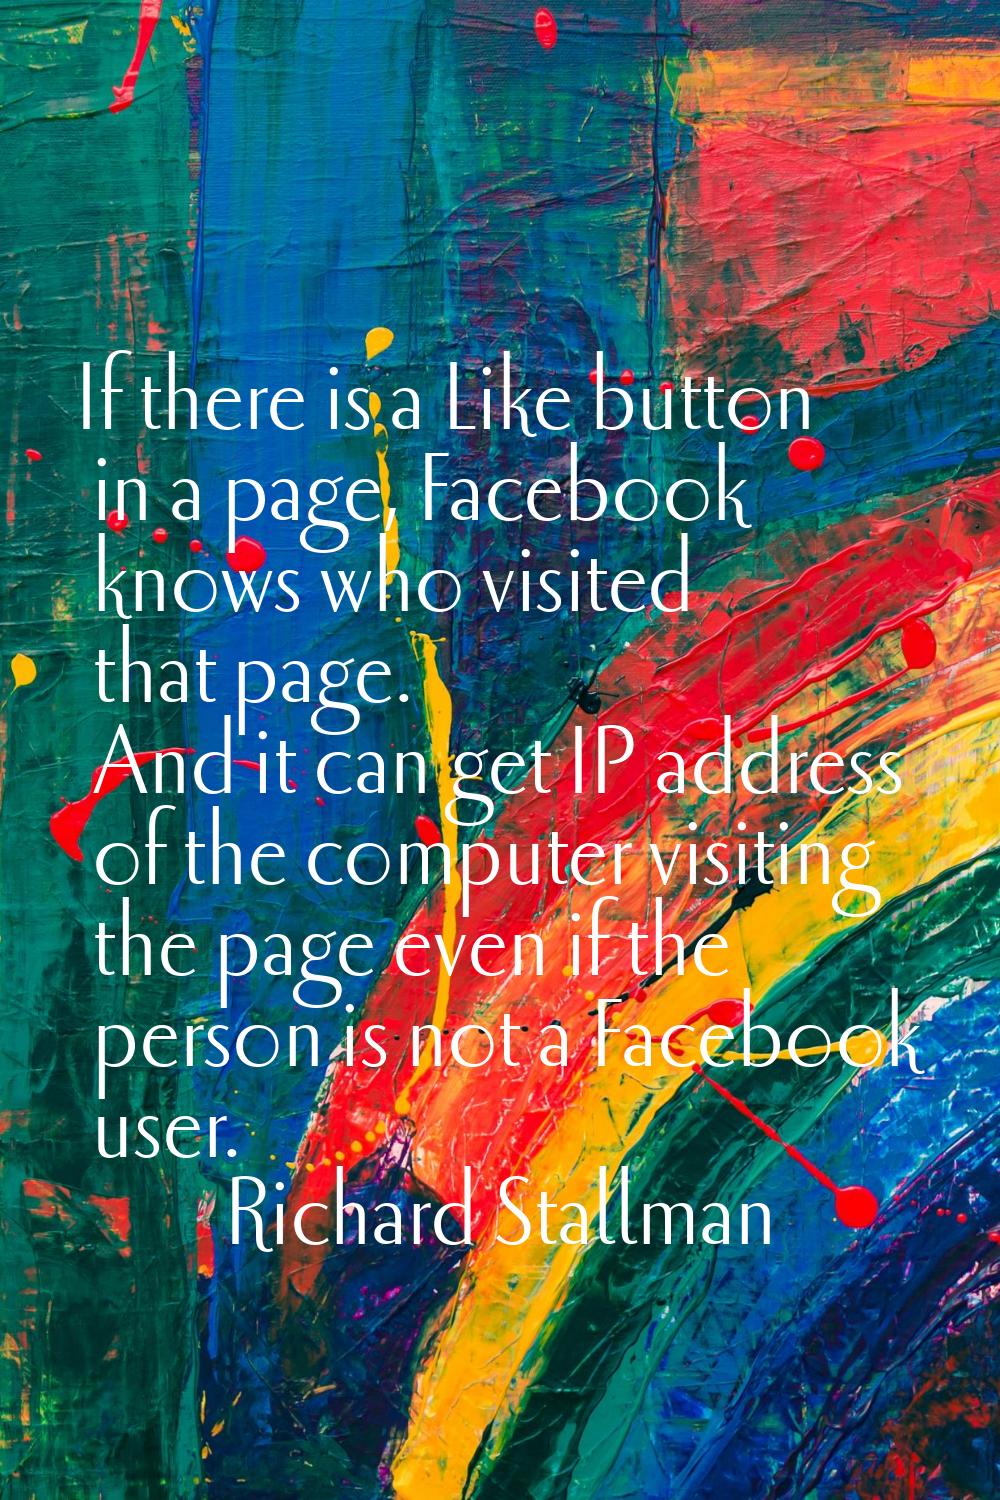 If there is a Like button in a page, Facebook knows who visited that page. And it can get IP addres